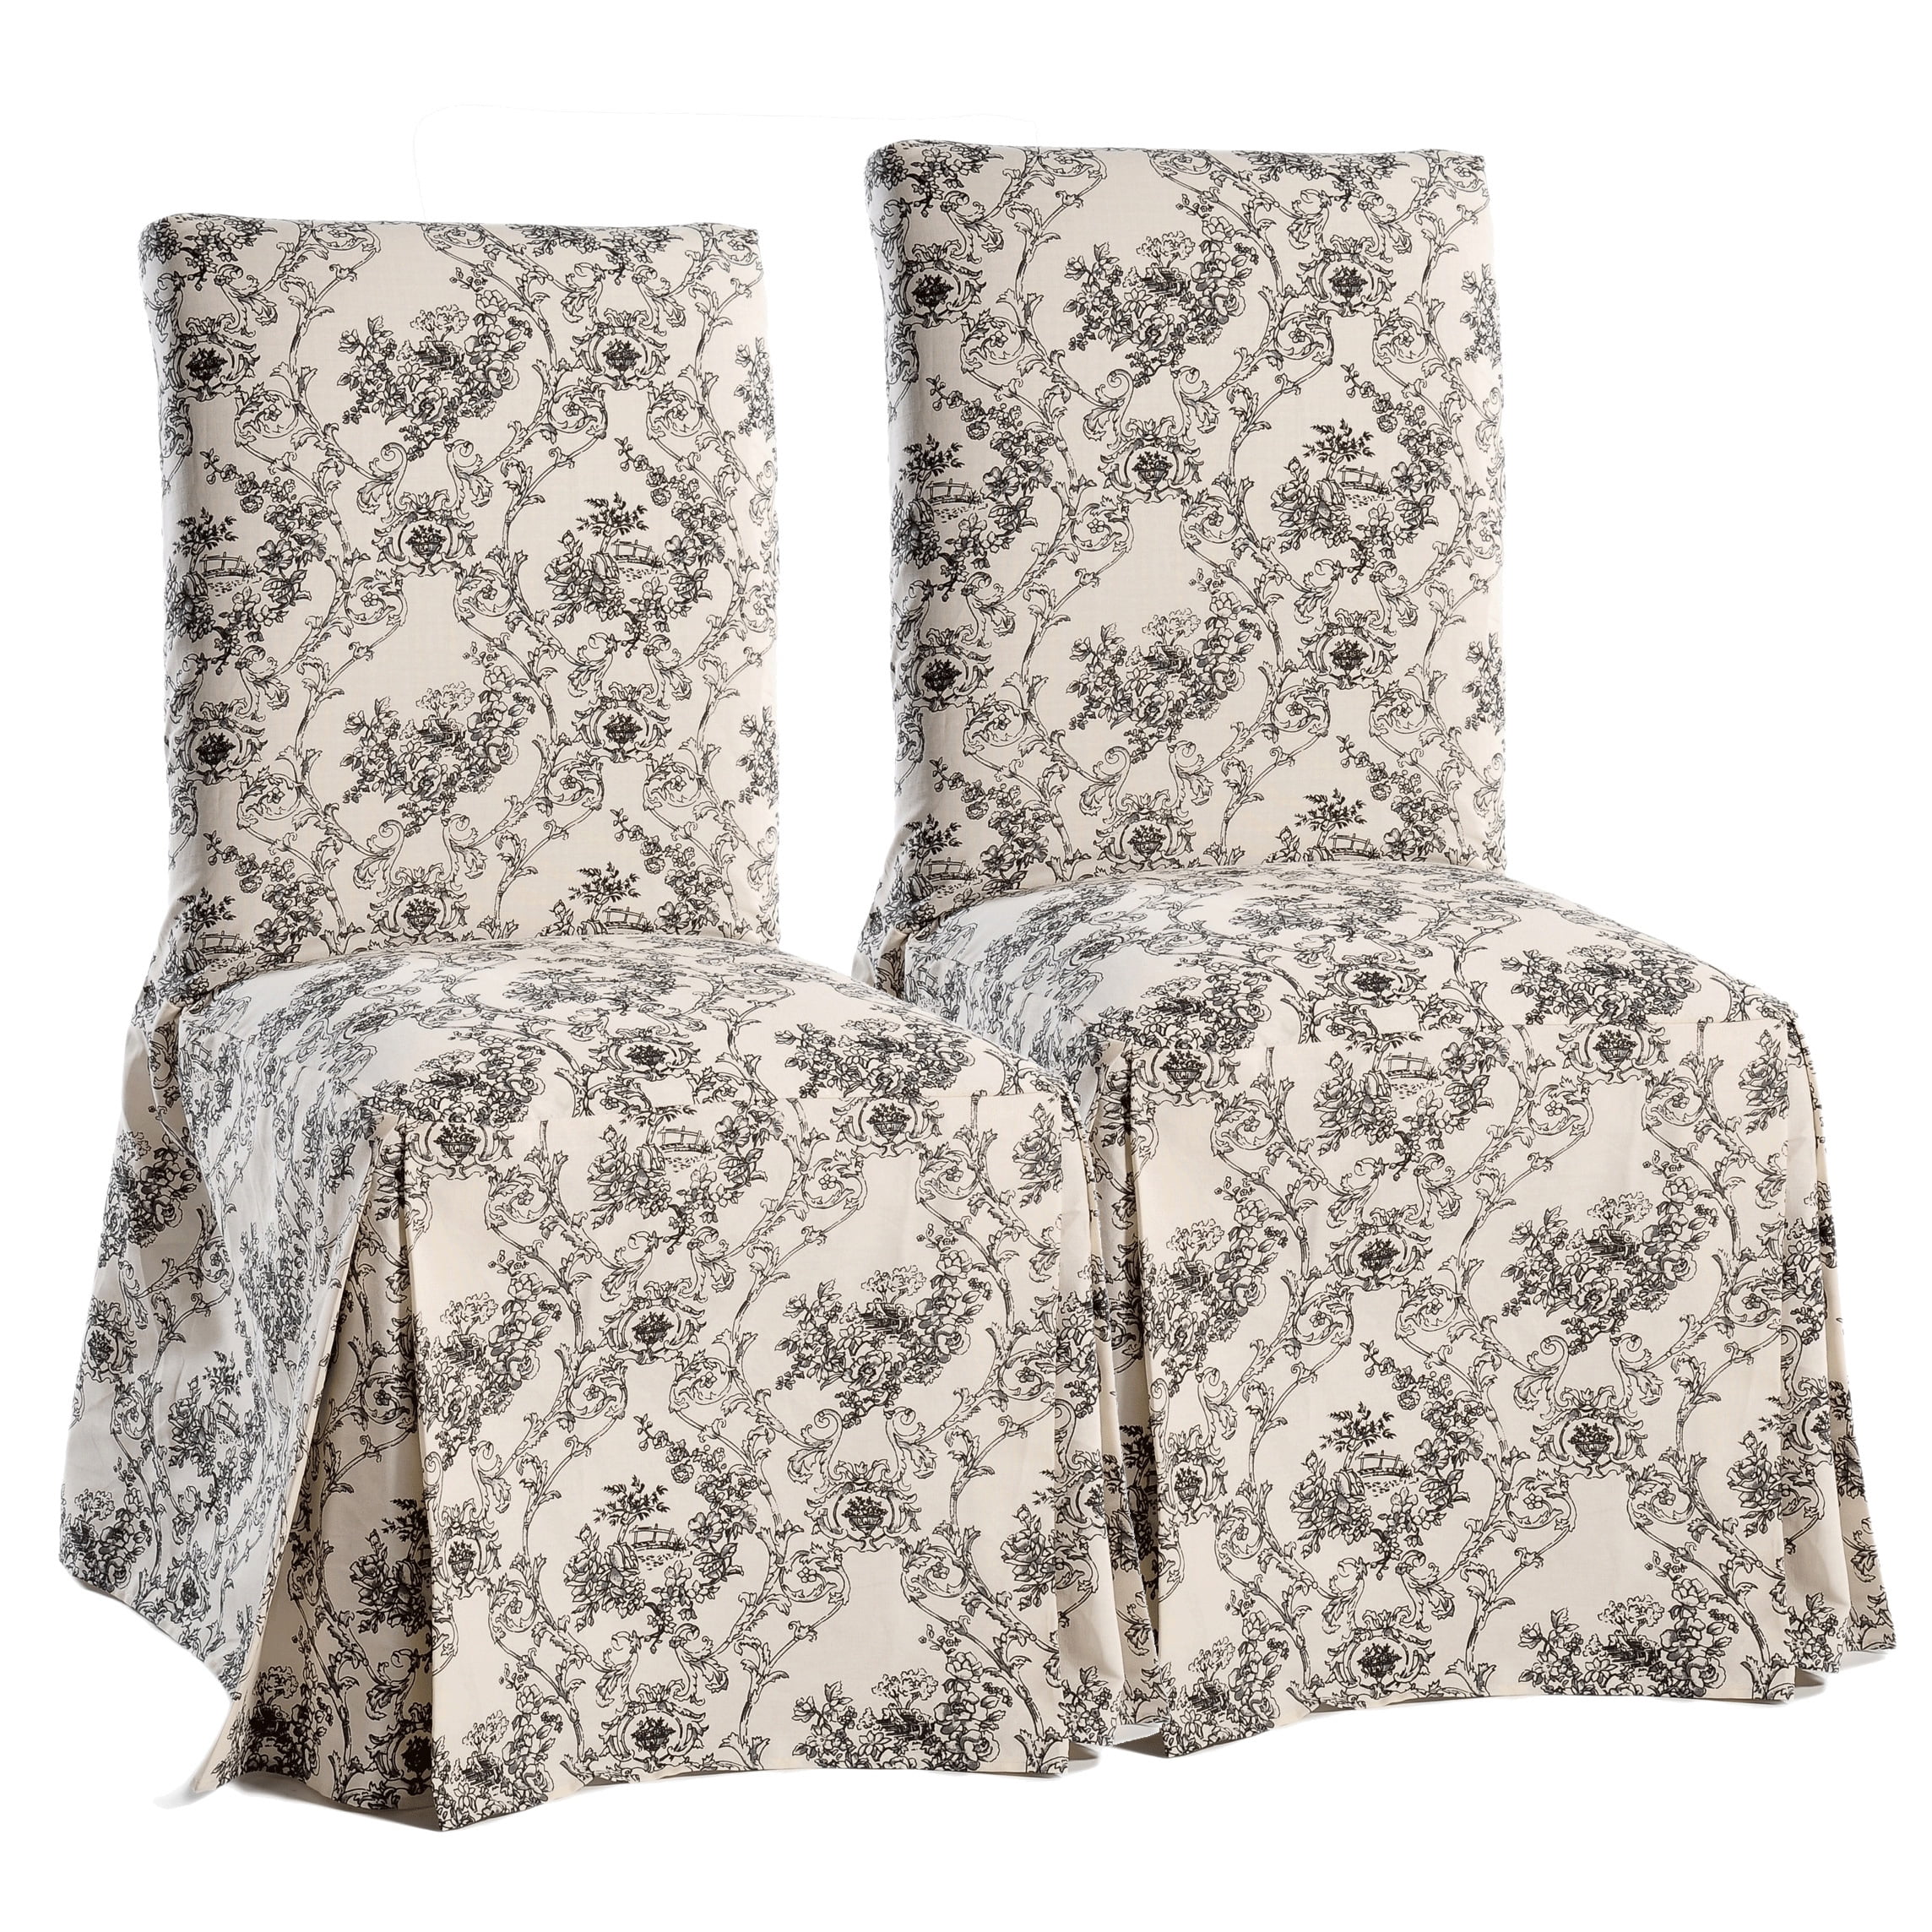 Classic Slipcovers Toile Dining Chair, Damask Dining Chair Slipcovers